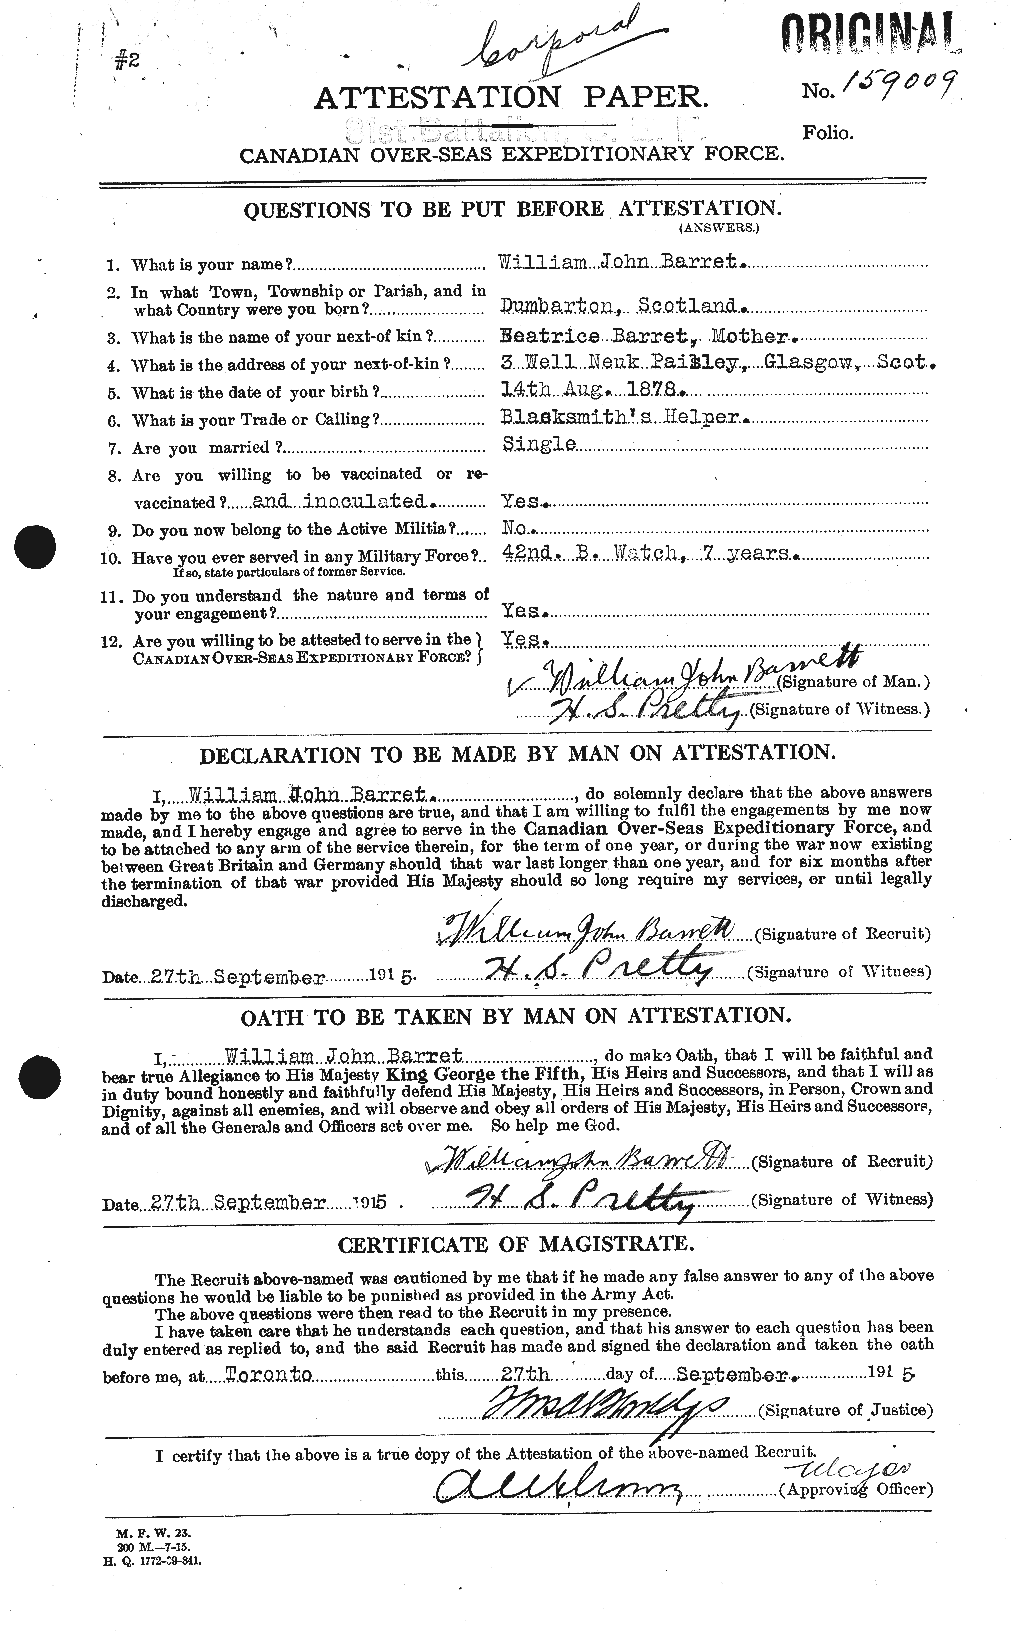 Personnel Records of the First World War - CEF 222211a